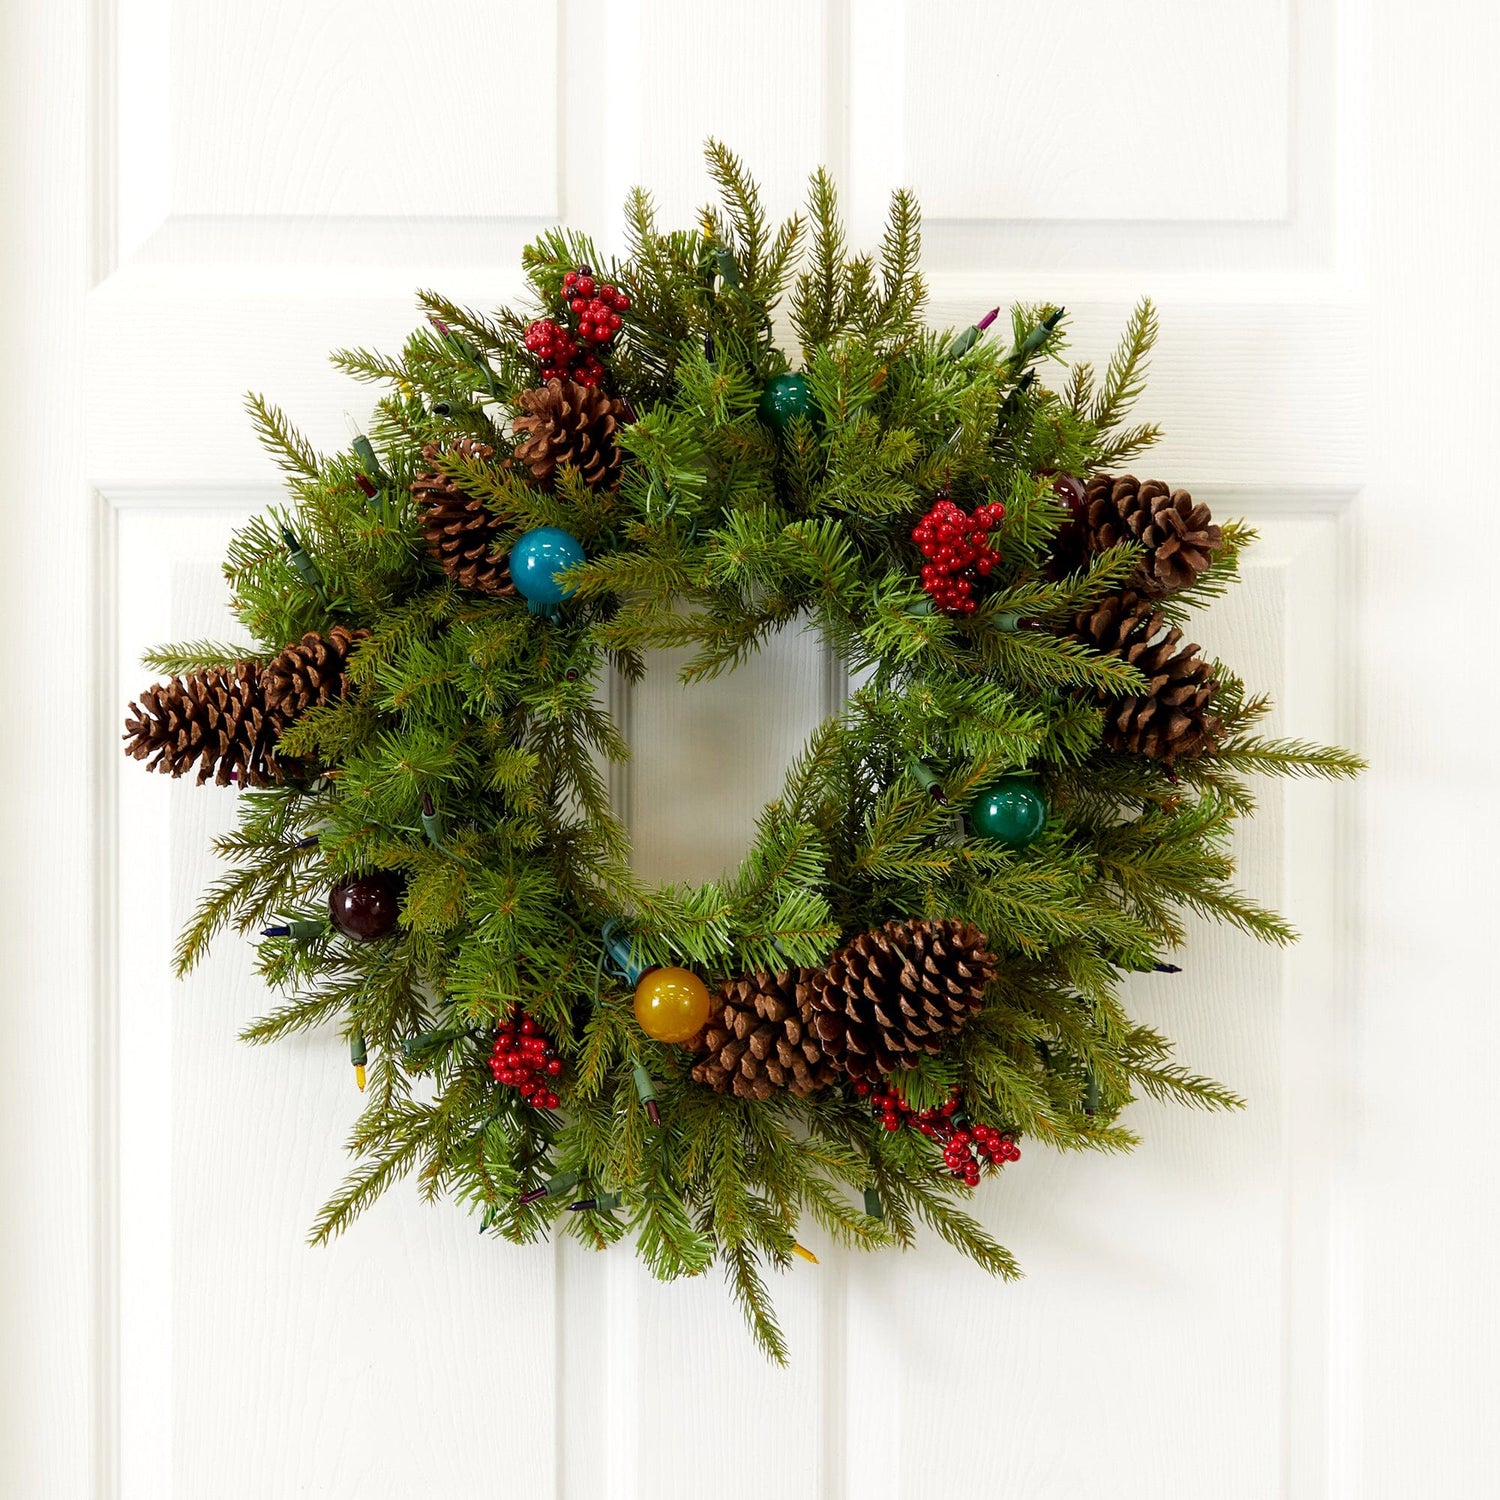 24” Christmas Artificial Wreath with 50 Multicolored Lights, 7 Multicolored Globe Bulbs, Berries and Pine Cones